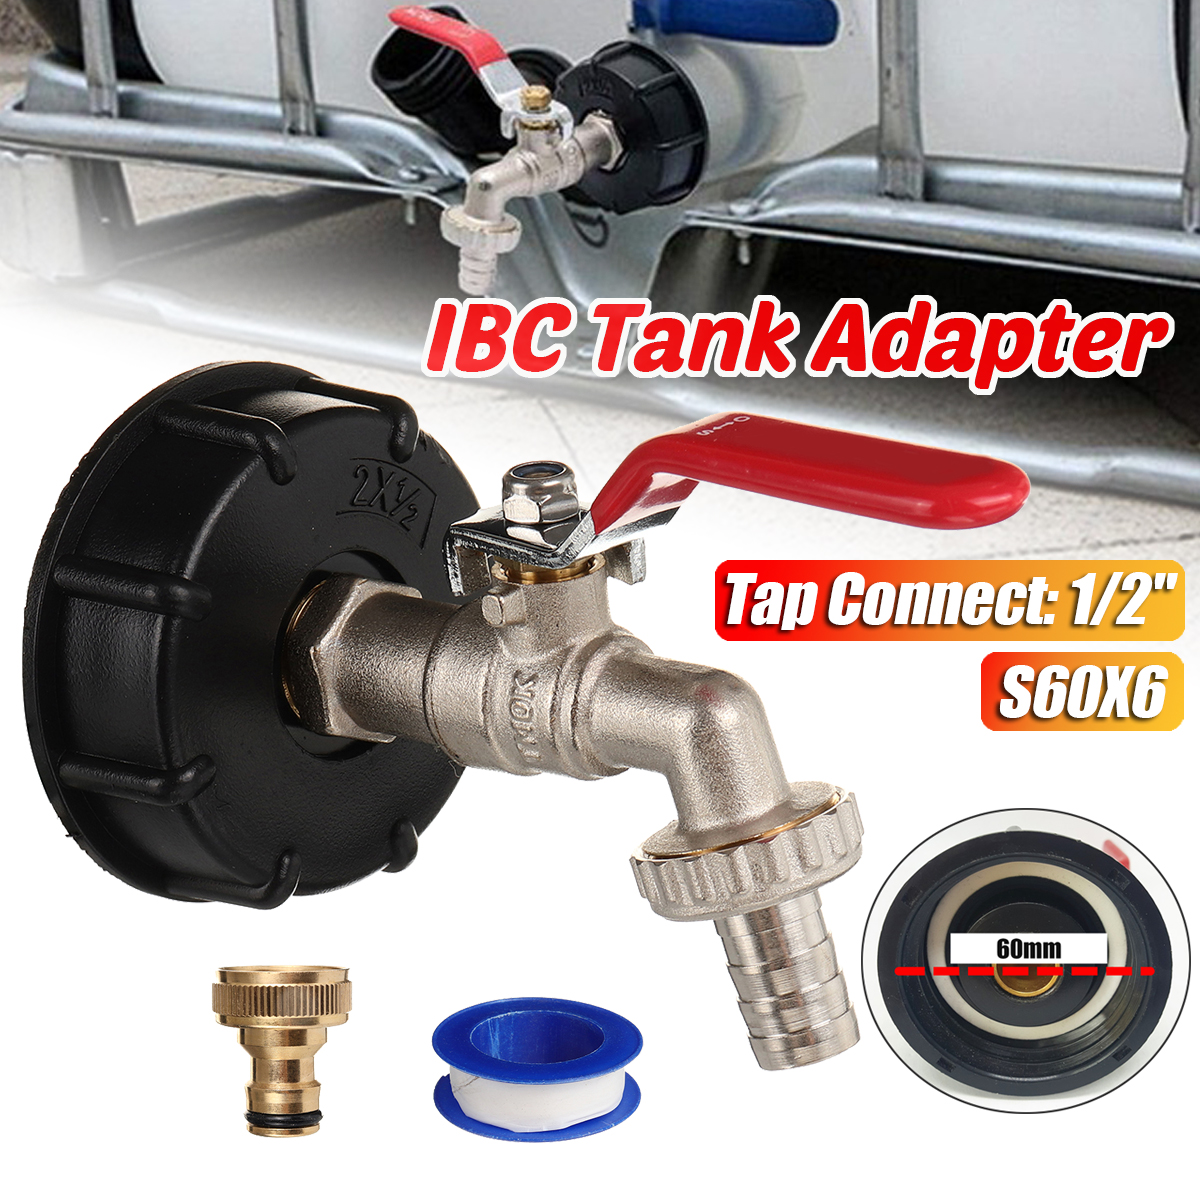 IBC-Tank-Adapter-to-12Yard-Garden-Water-Tap-Hose-Connector-Fitting-Tool-S60X6-1952469-1